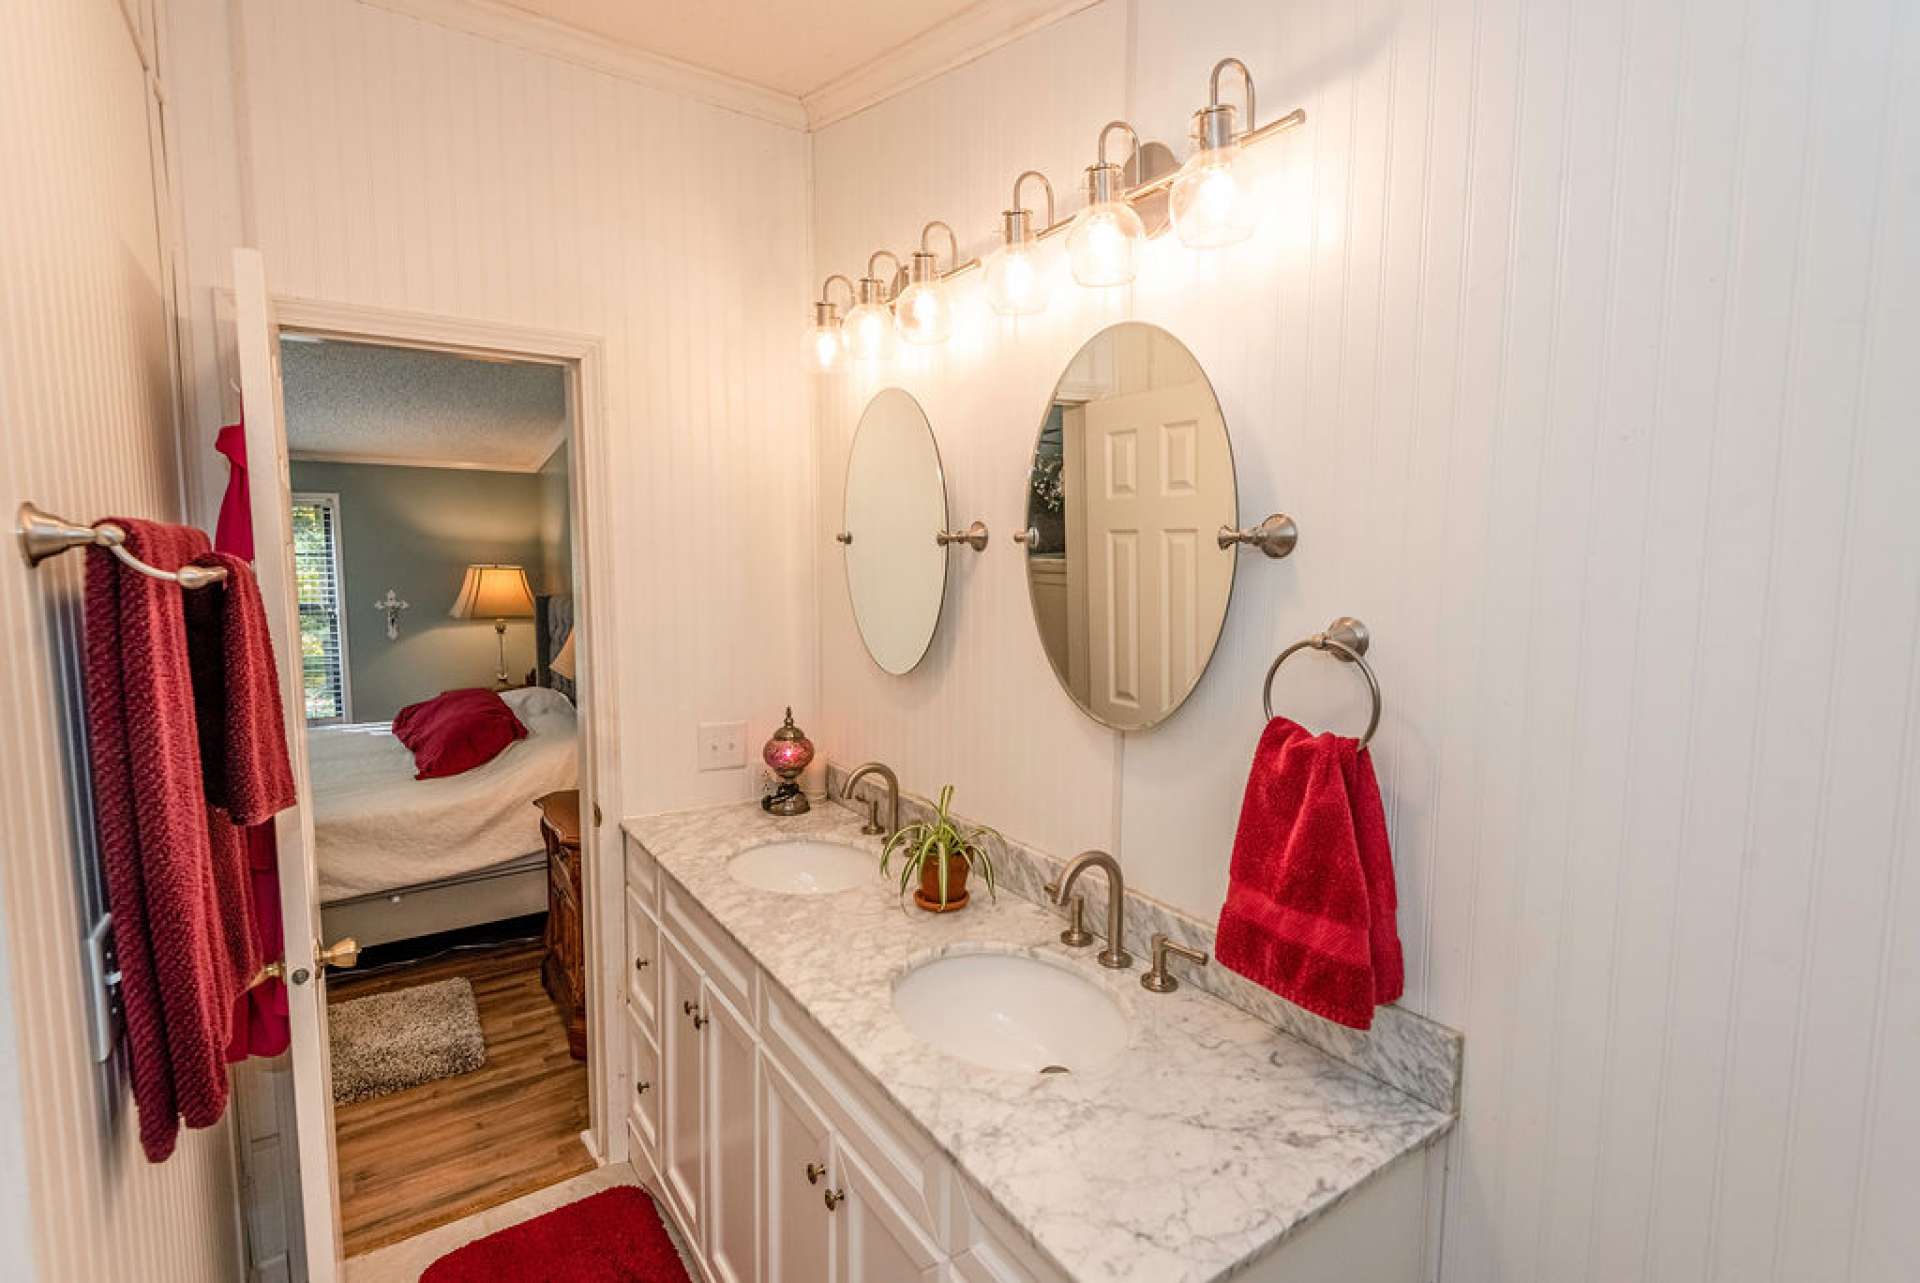 The master bath features a double vanity and a walk-in shower.